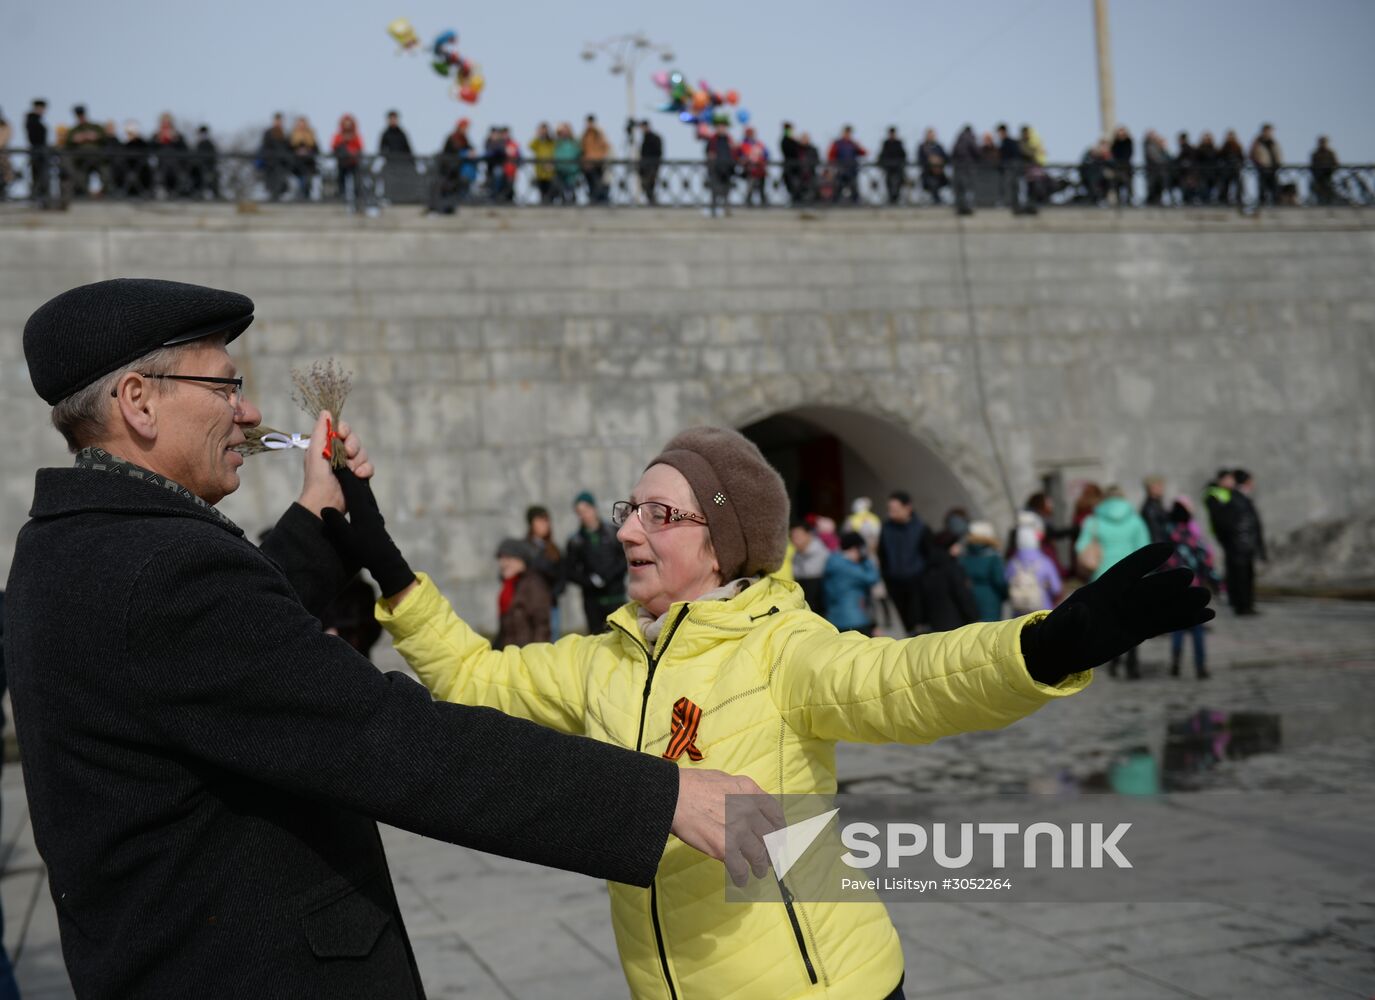 Celebrations mark 3rd anniversary of Crimea's reunion with Russia